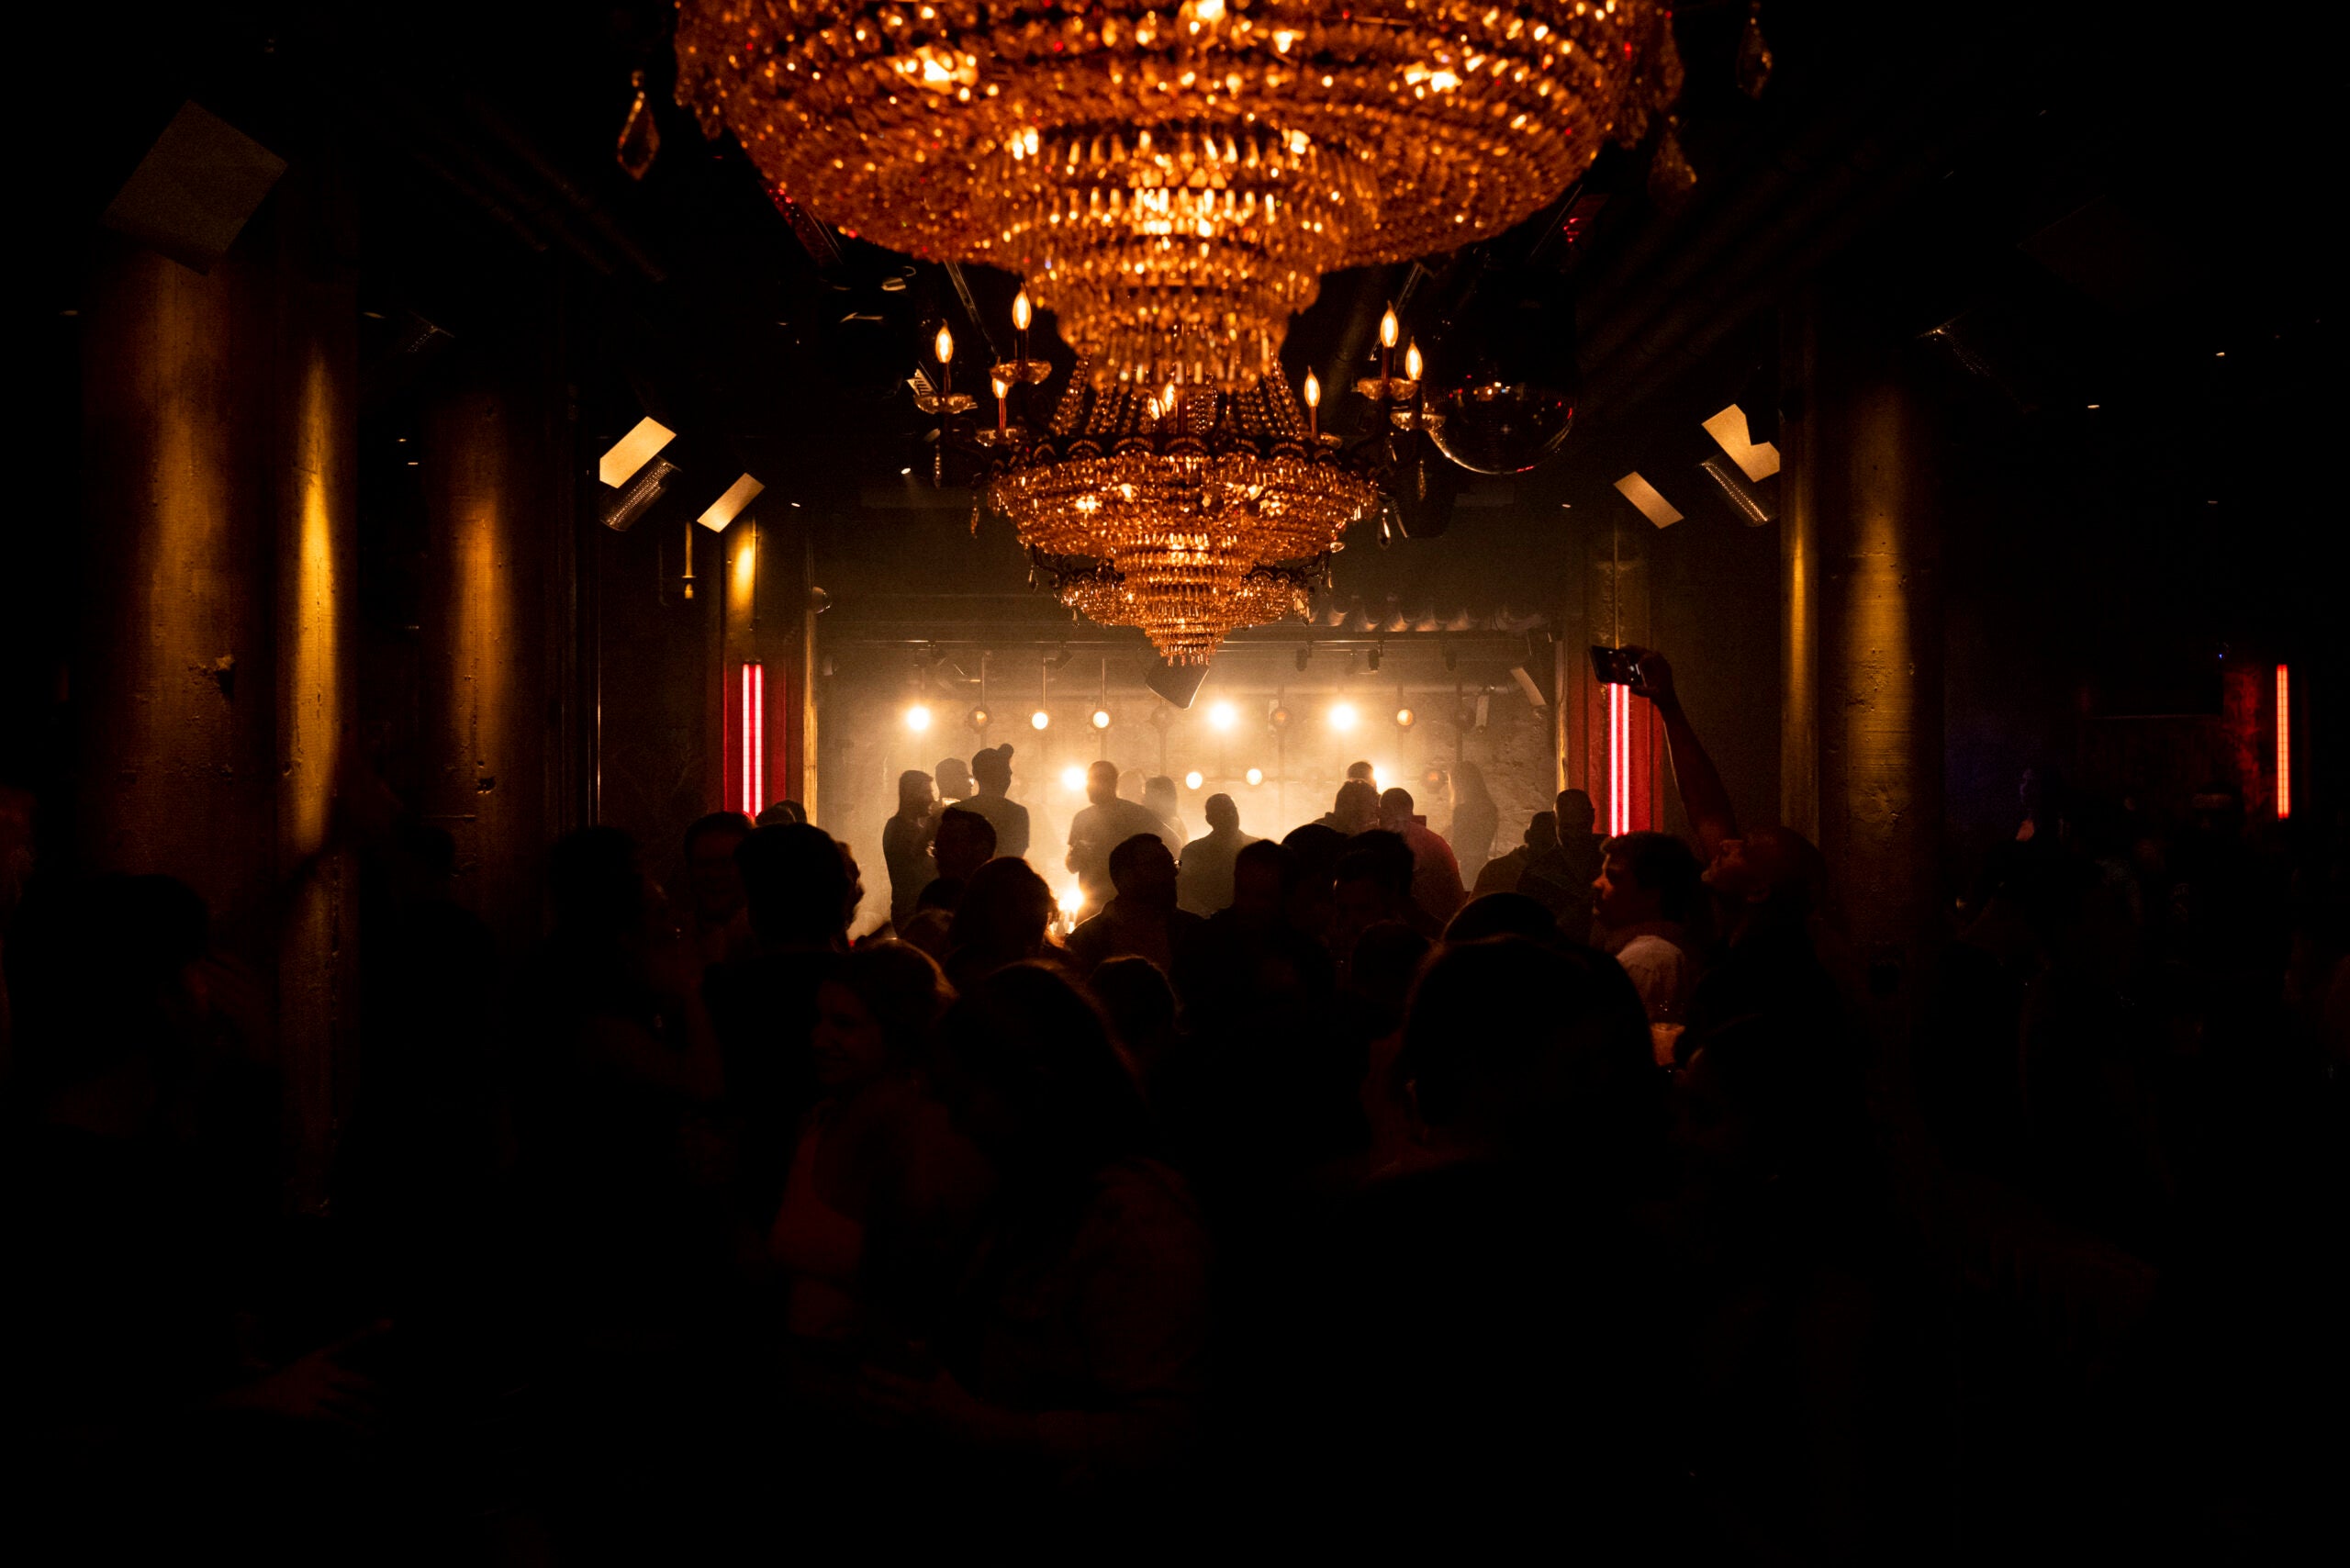 A dim nightclub in Boston, showing silhouetted patrons in front of a stage. A chandelier hangs above the crowd.